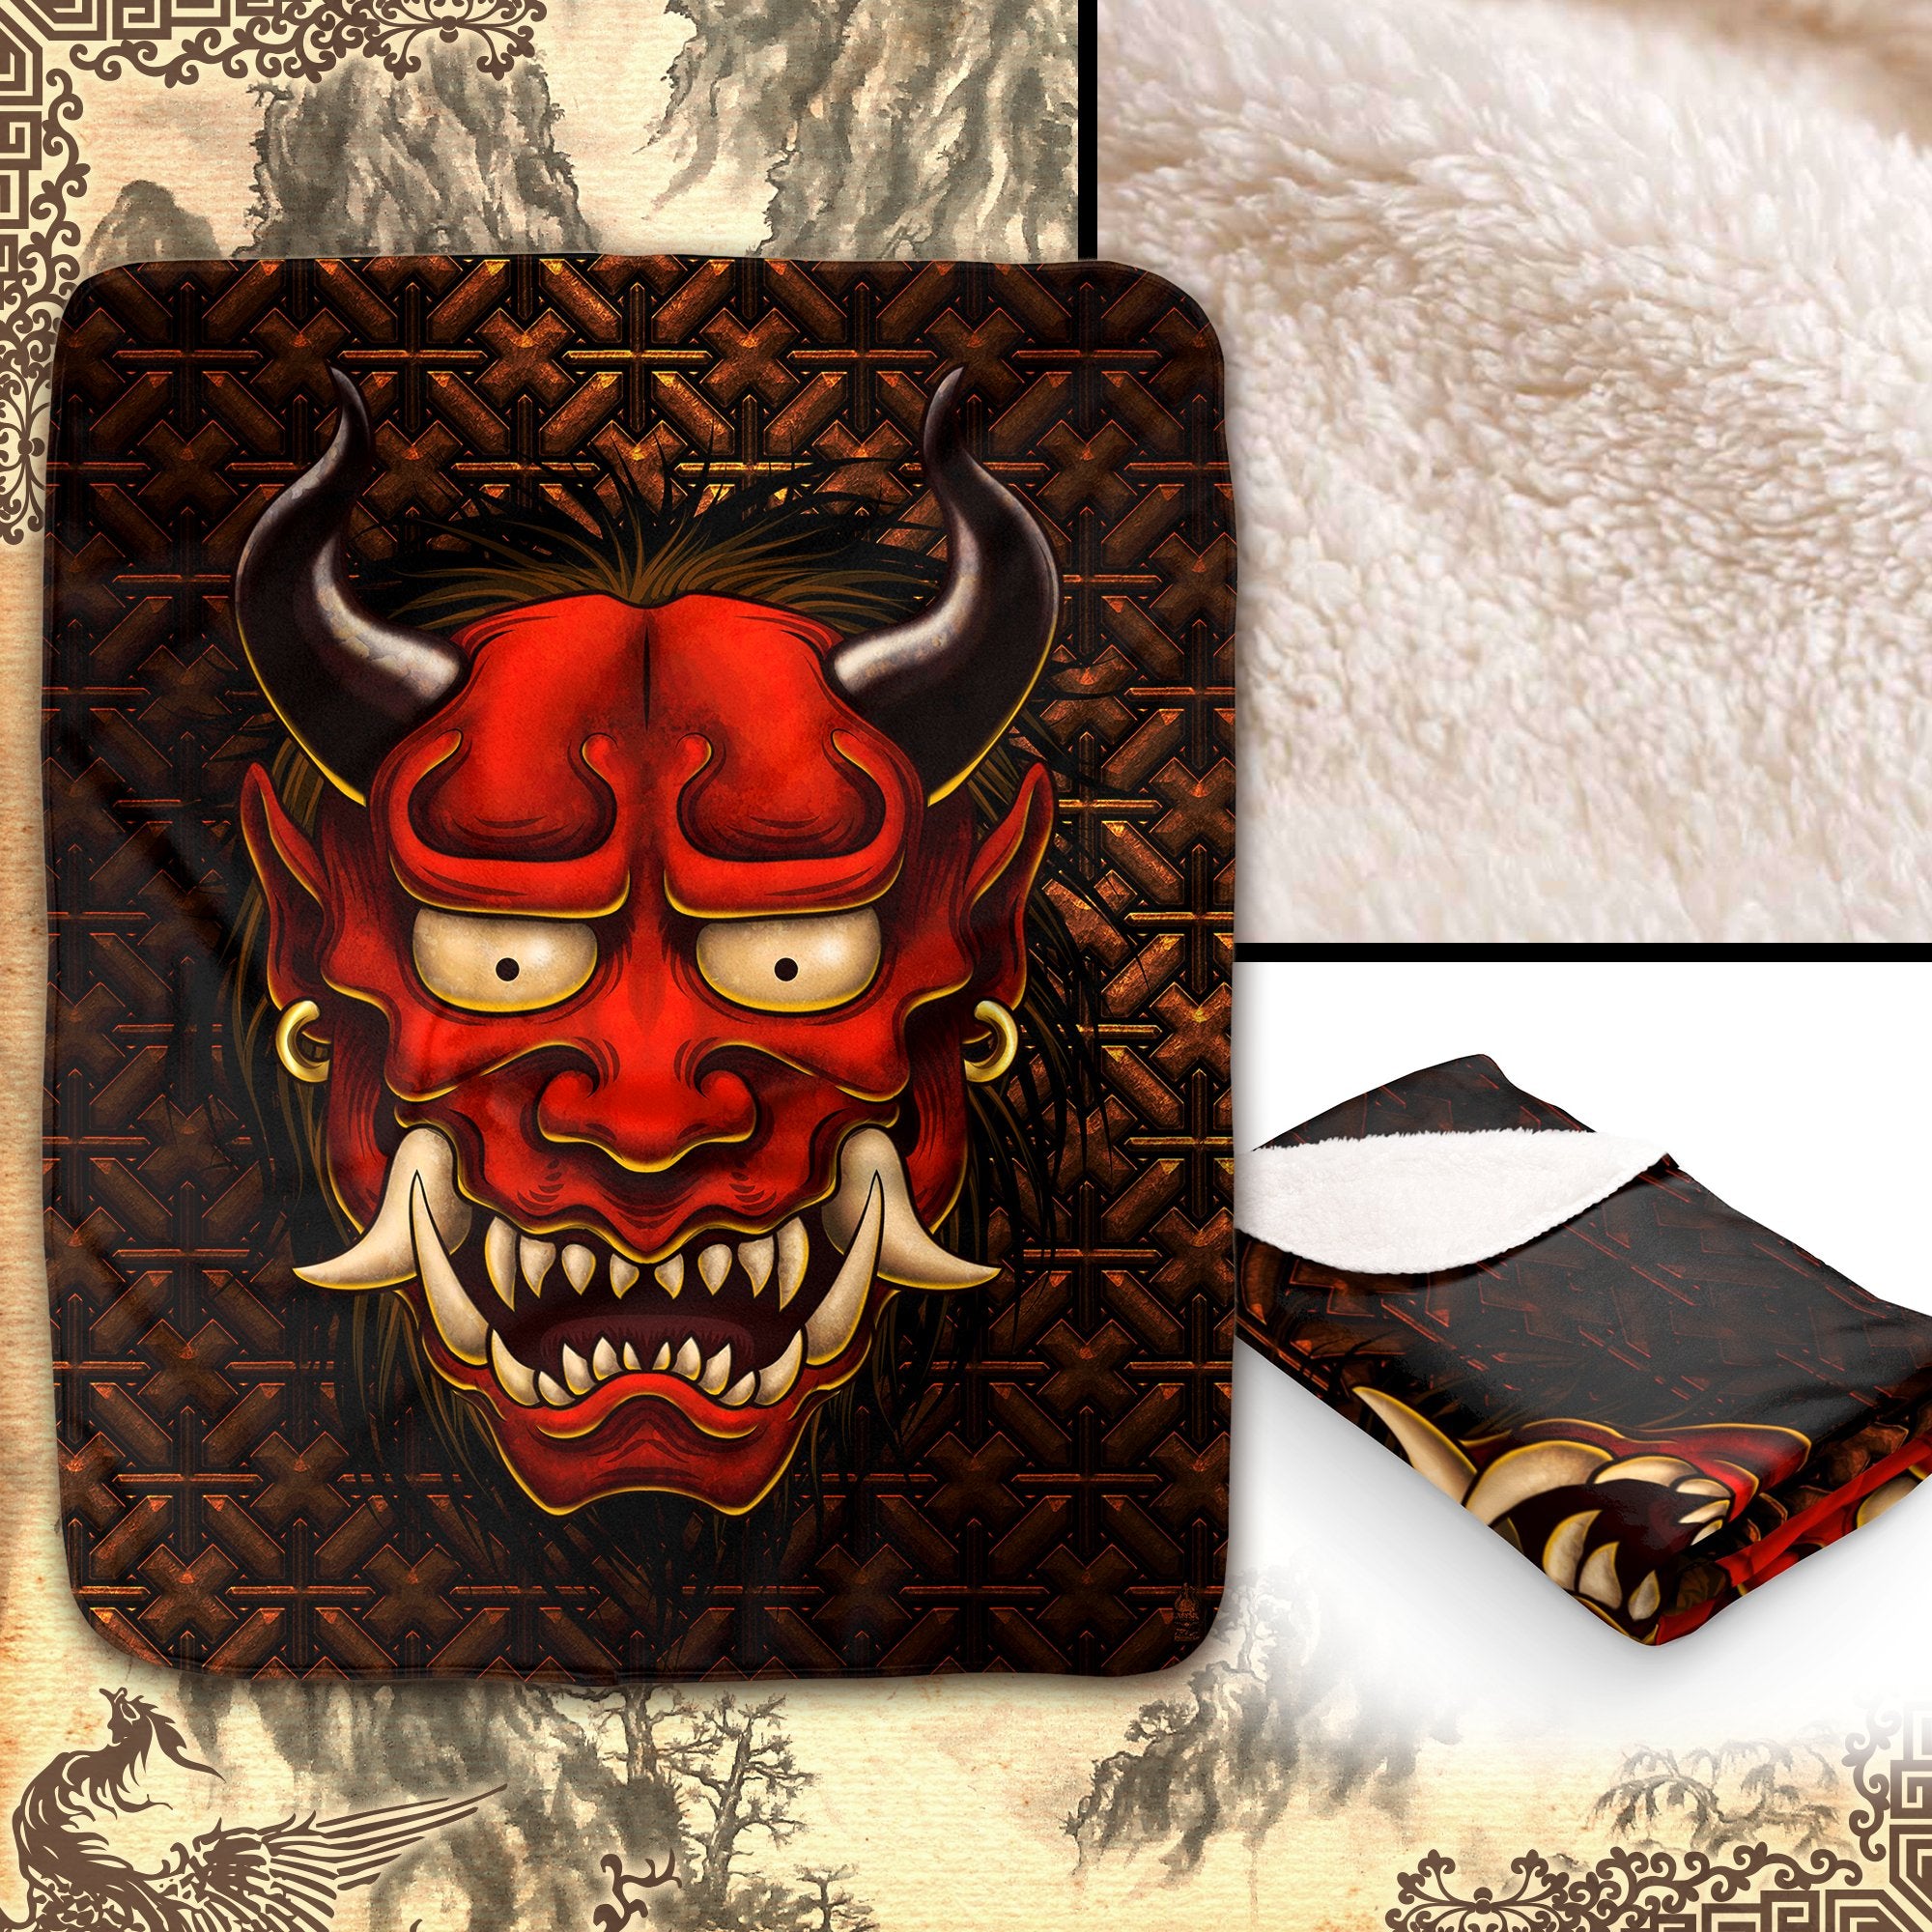 Oni Sherpa Fleece Throw Blanket, Japanese Demon, Alternative Home Decor, Eclectic and Funky Gift - Original White and Red, 2 Colors - Abysm Internal